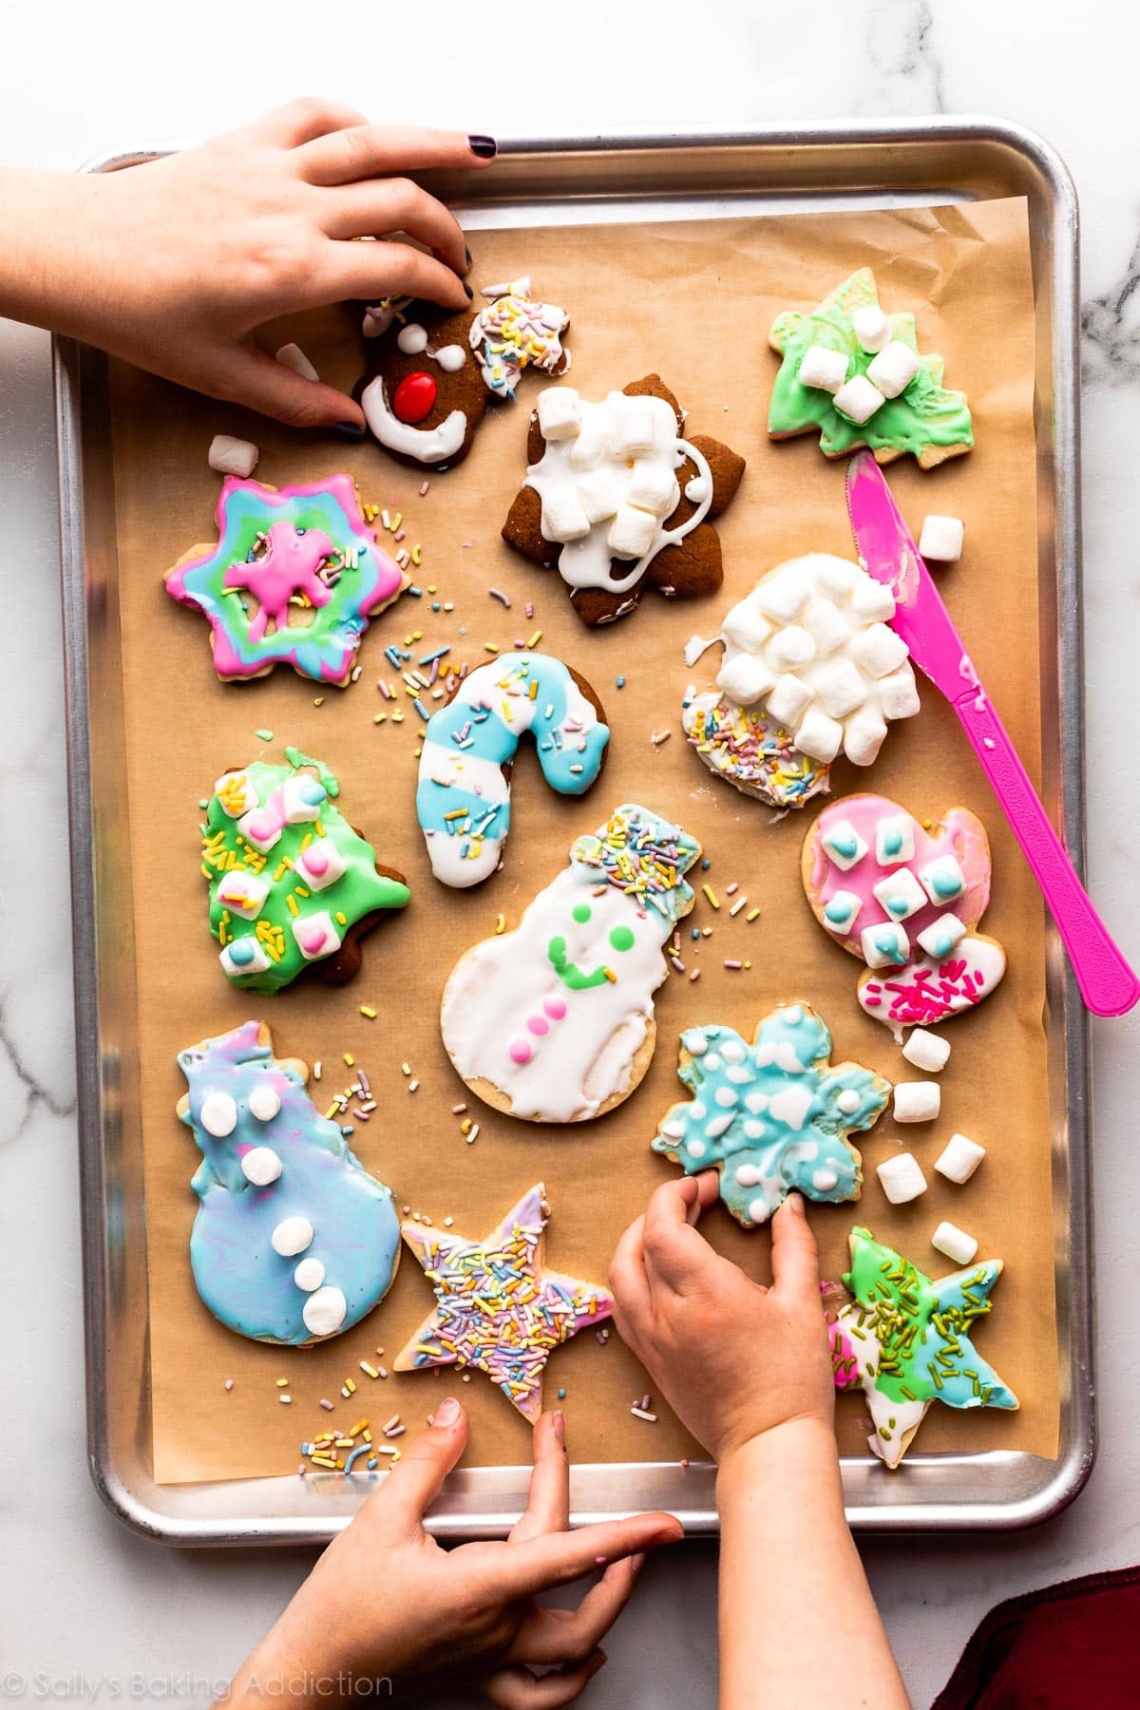 Get Creative With Cookie Decorating: Fun Ideas For Custom Treats